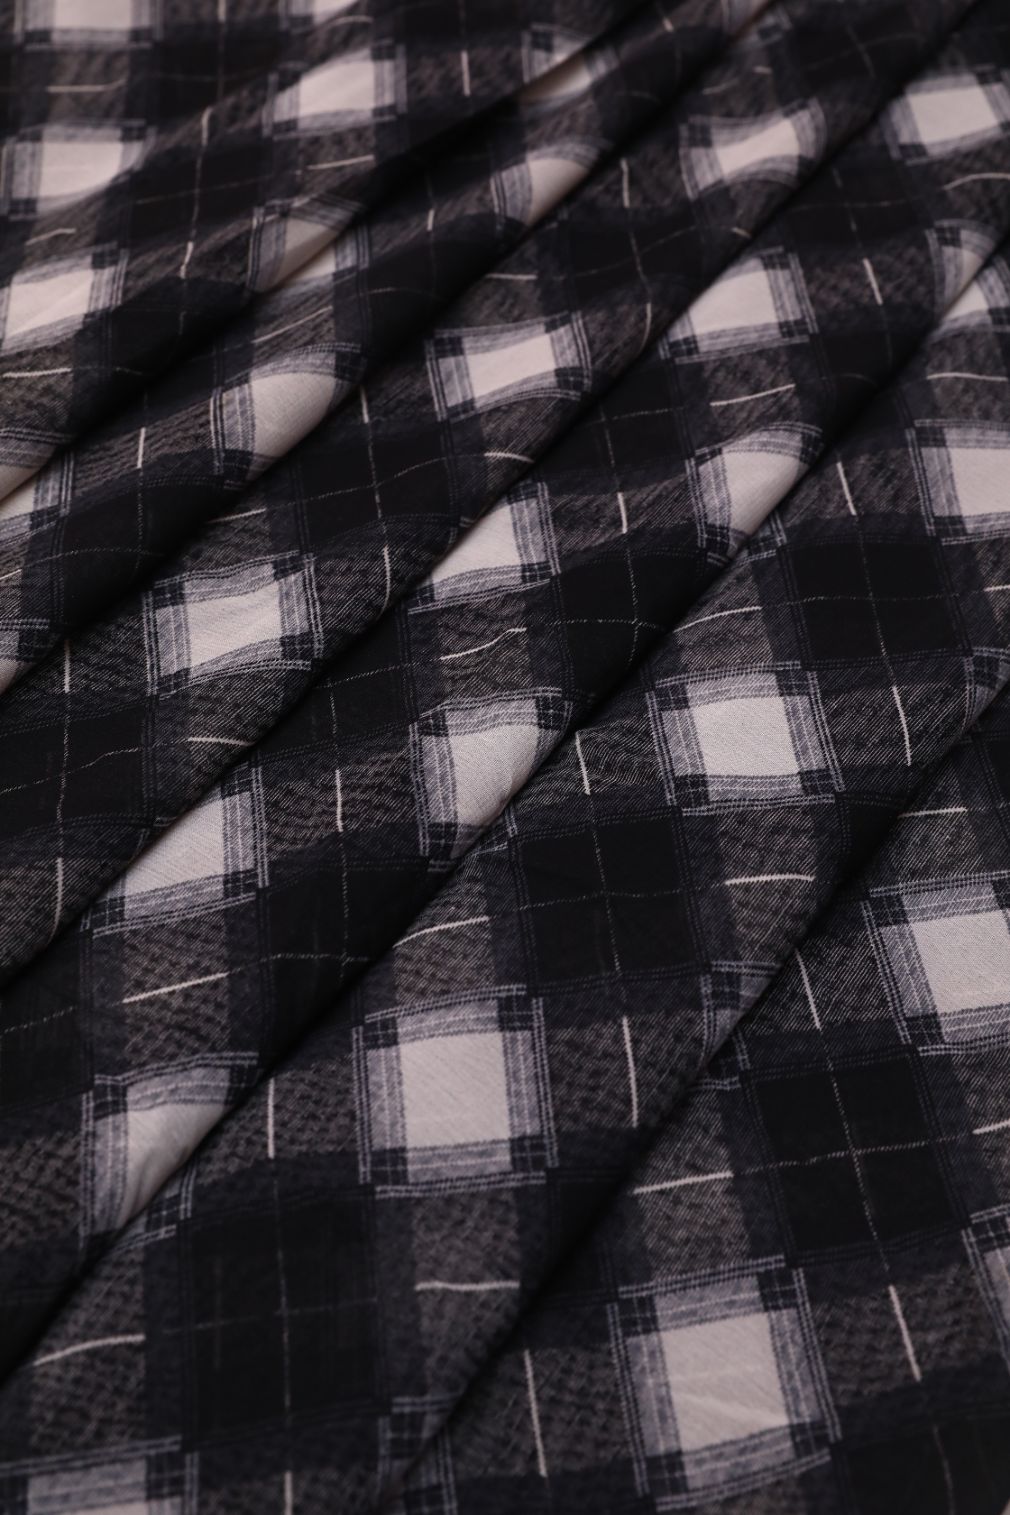 Black and White Patterned Georgette Fabric